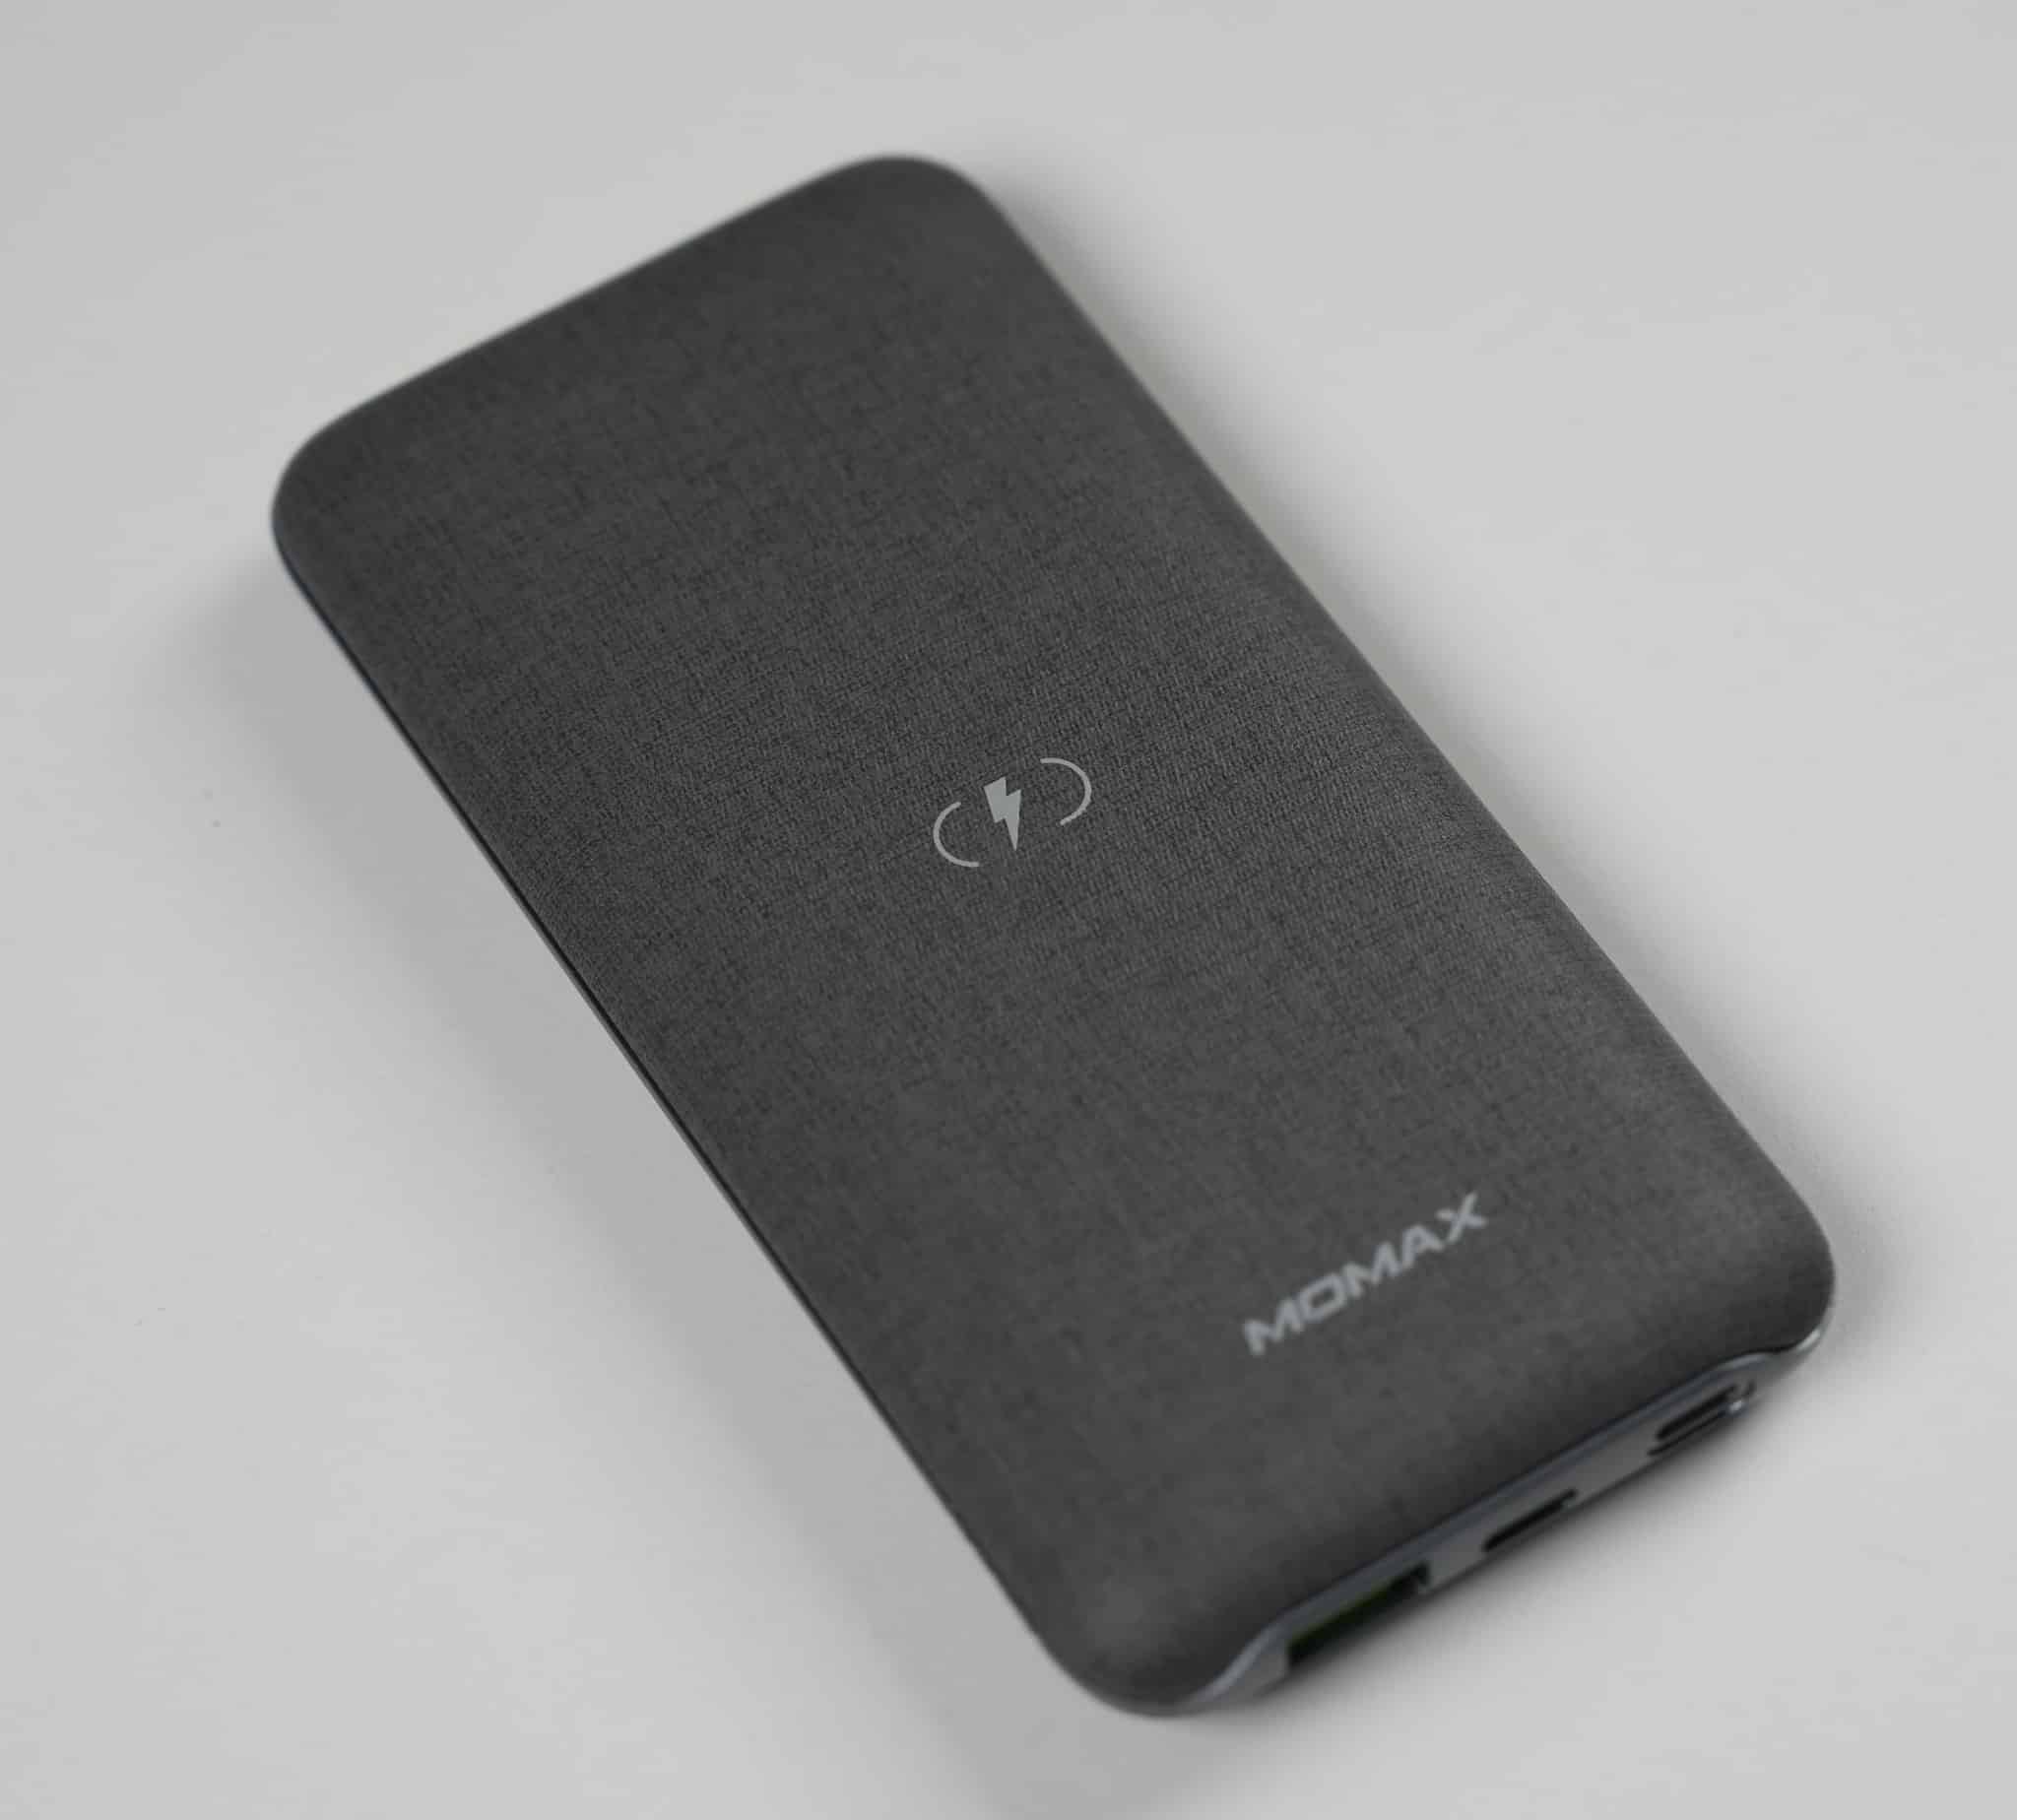 Q.Power MFi Touch wireless power bank design and built